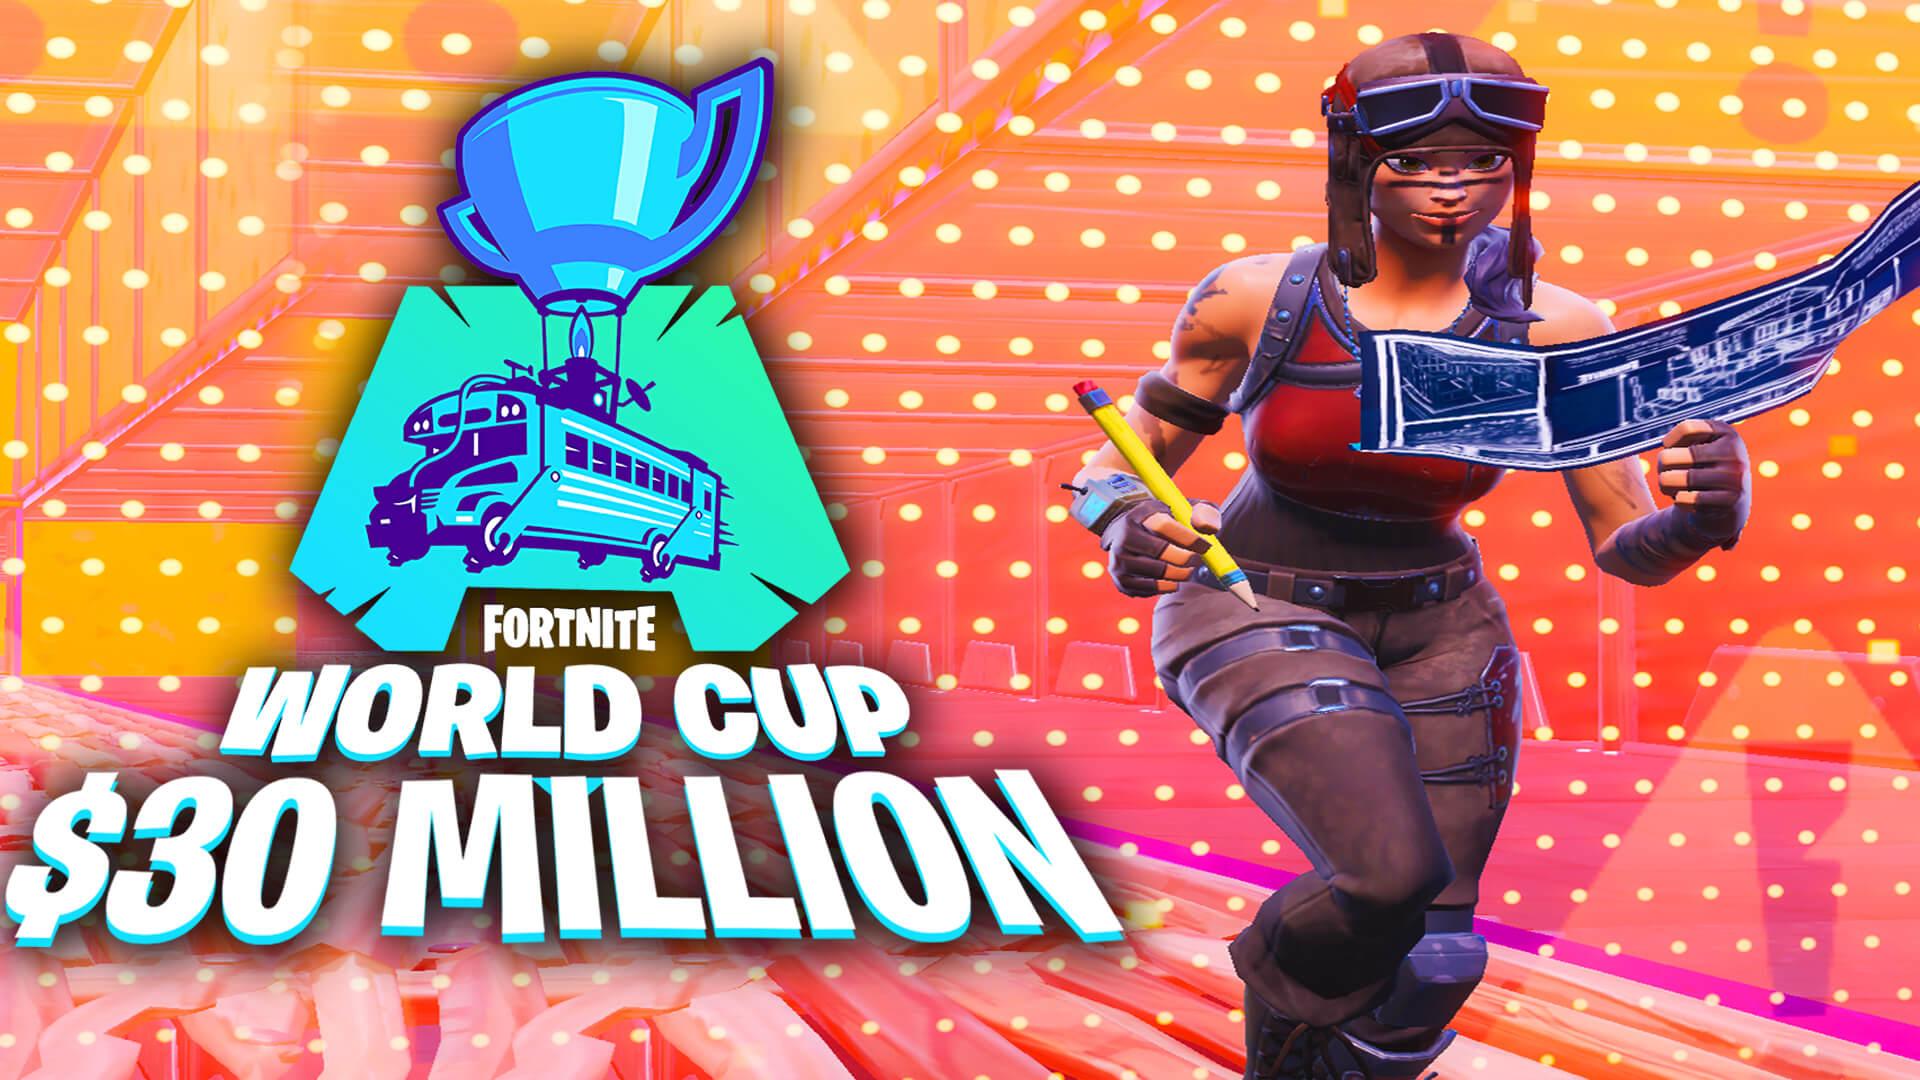 Fortnite Wallpapers World Cup / World Cup Fortnite Wallpapers 2020